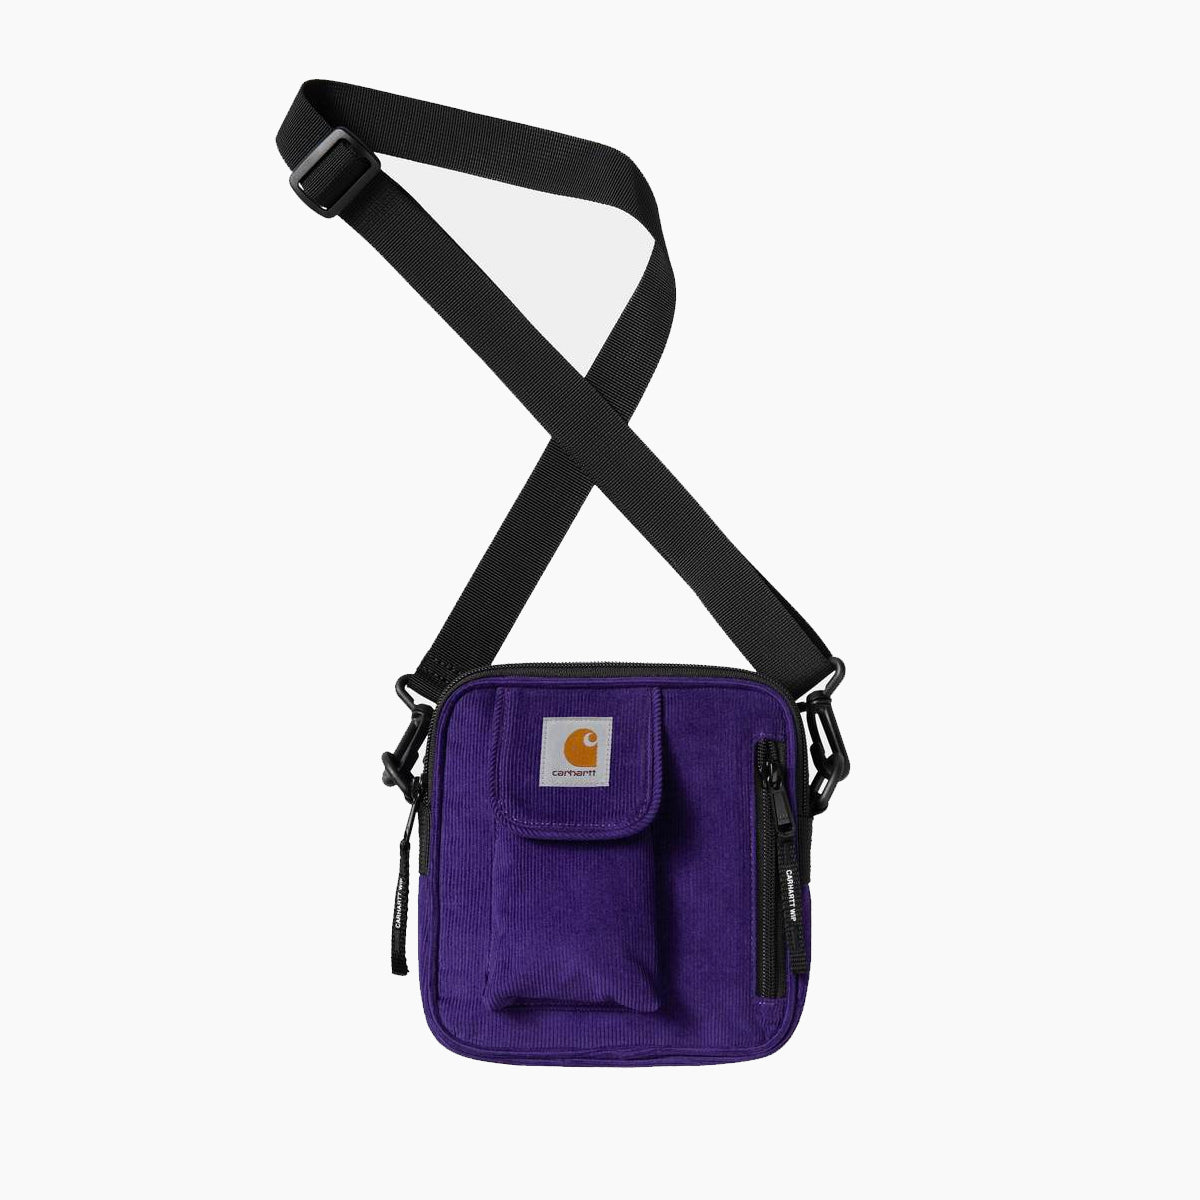 Carhartt WIP Essentials Cord Bag-I032916 - 1Y5.XX-Purple-One Size-SUEDE Store